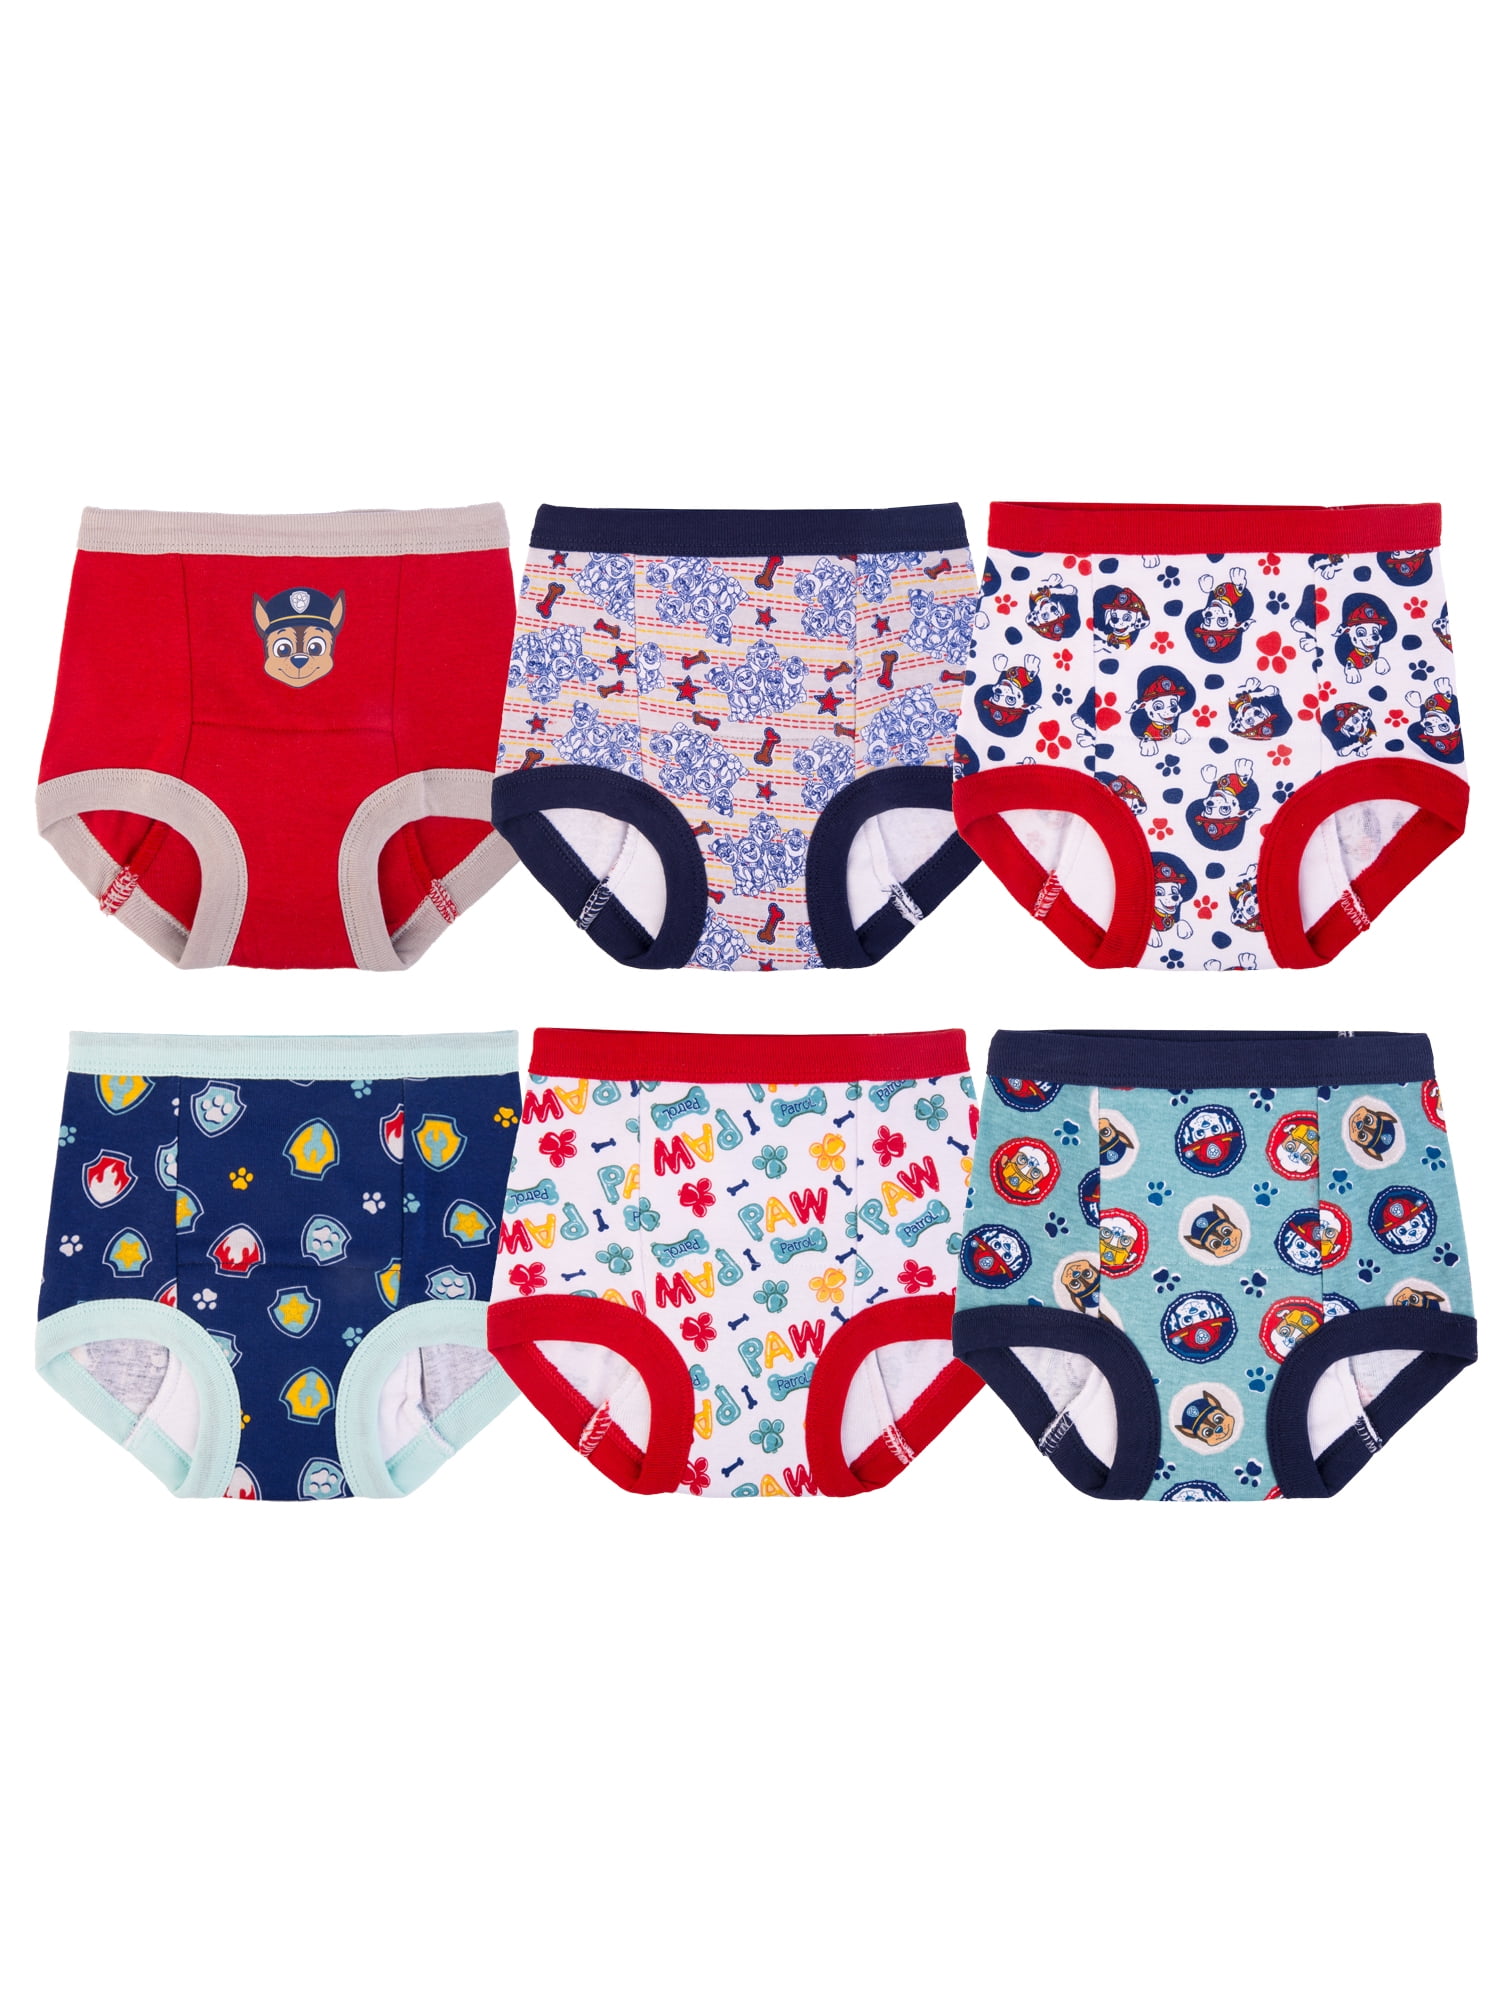 Paw Patrol Multicolor Training Pants 6 Pack 3T + Chart with